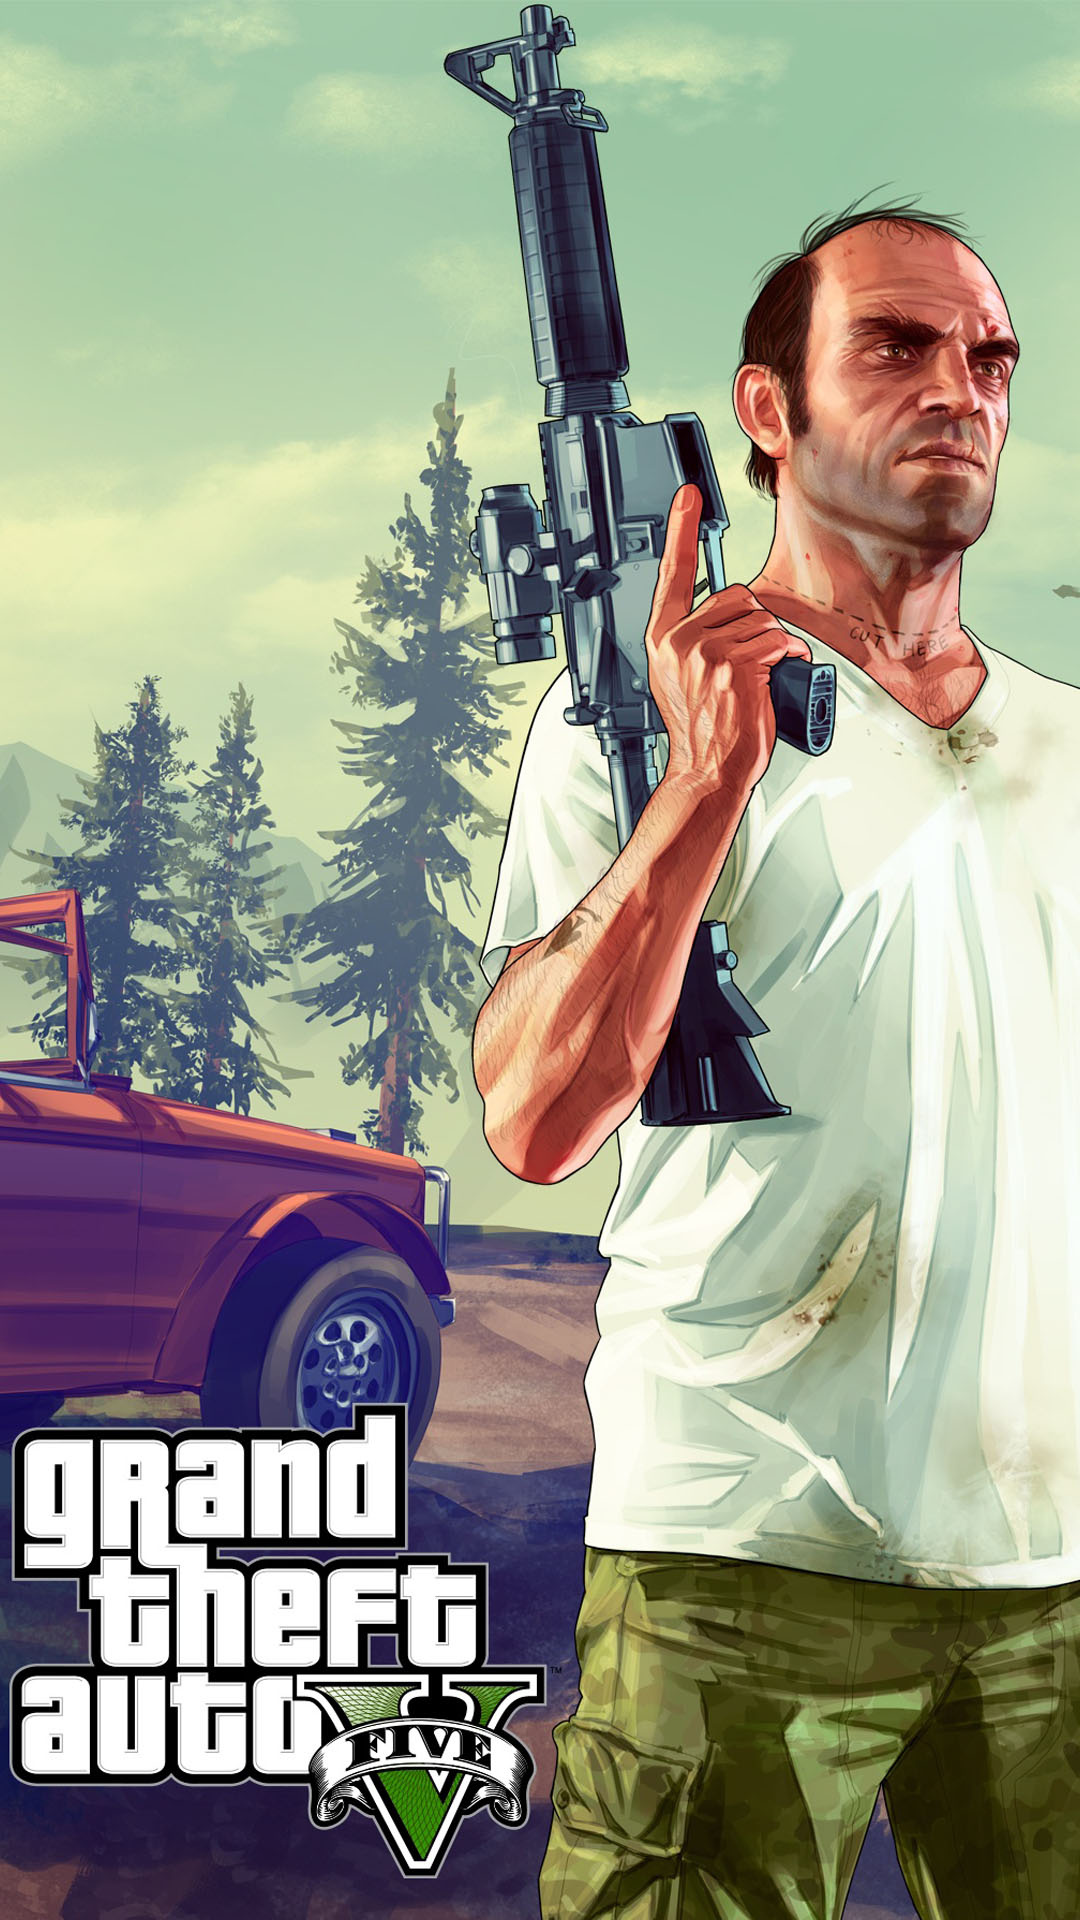 GTA V, Game of Thrones crossover, Epic wallpapers, Mashup masterpiece, 1080x1920 Full HD Handy